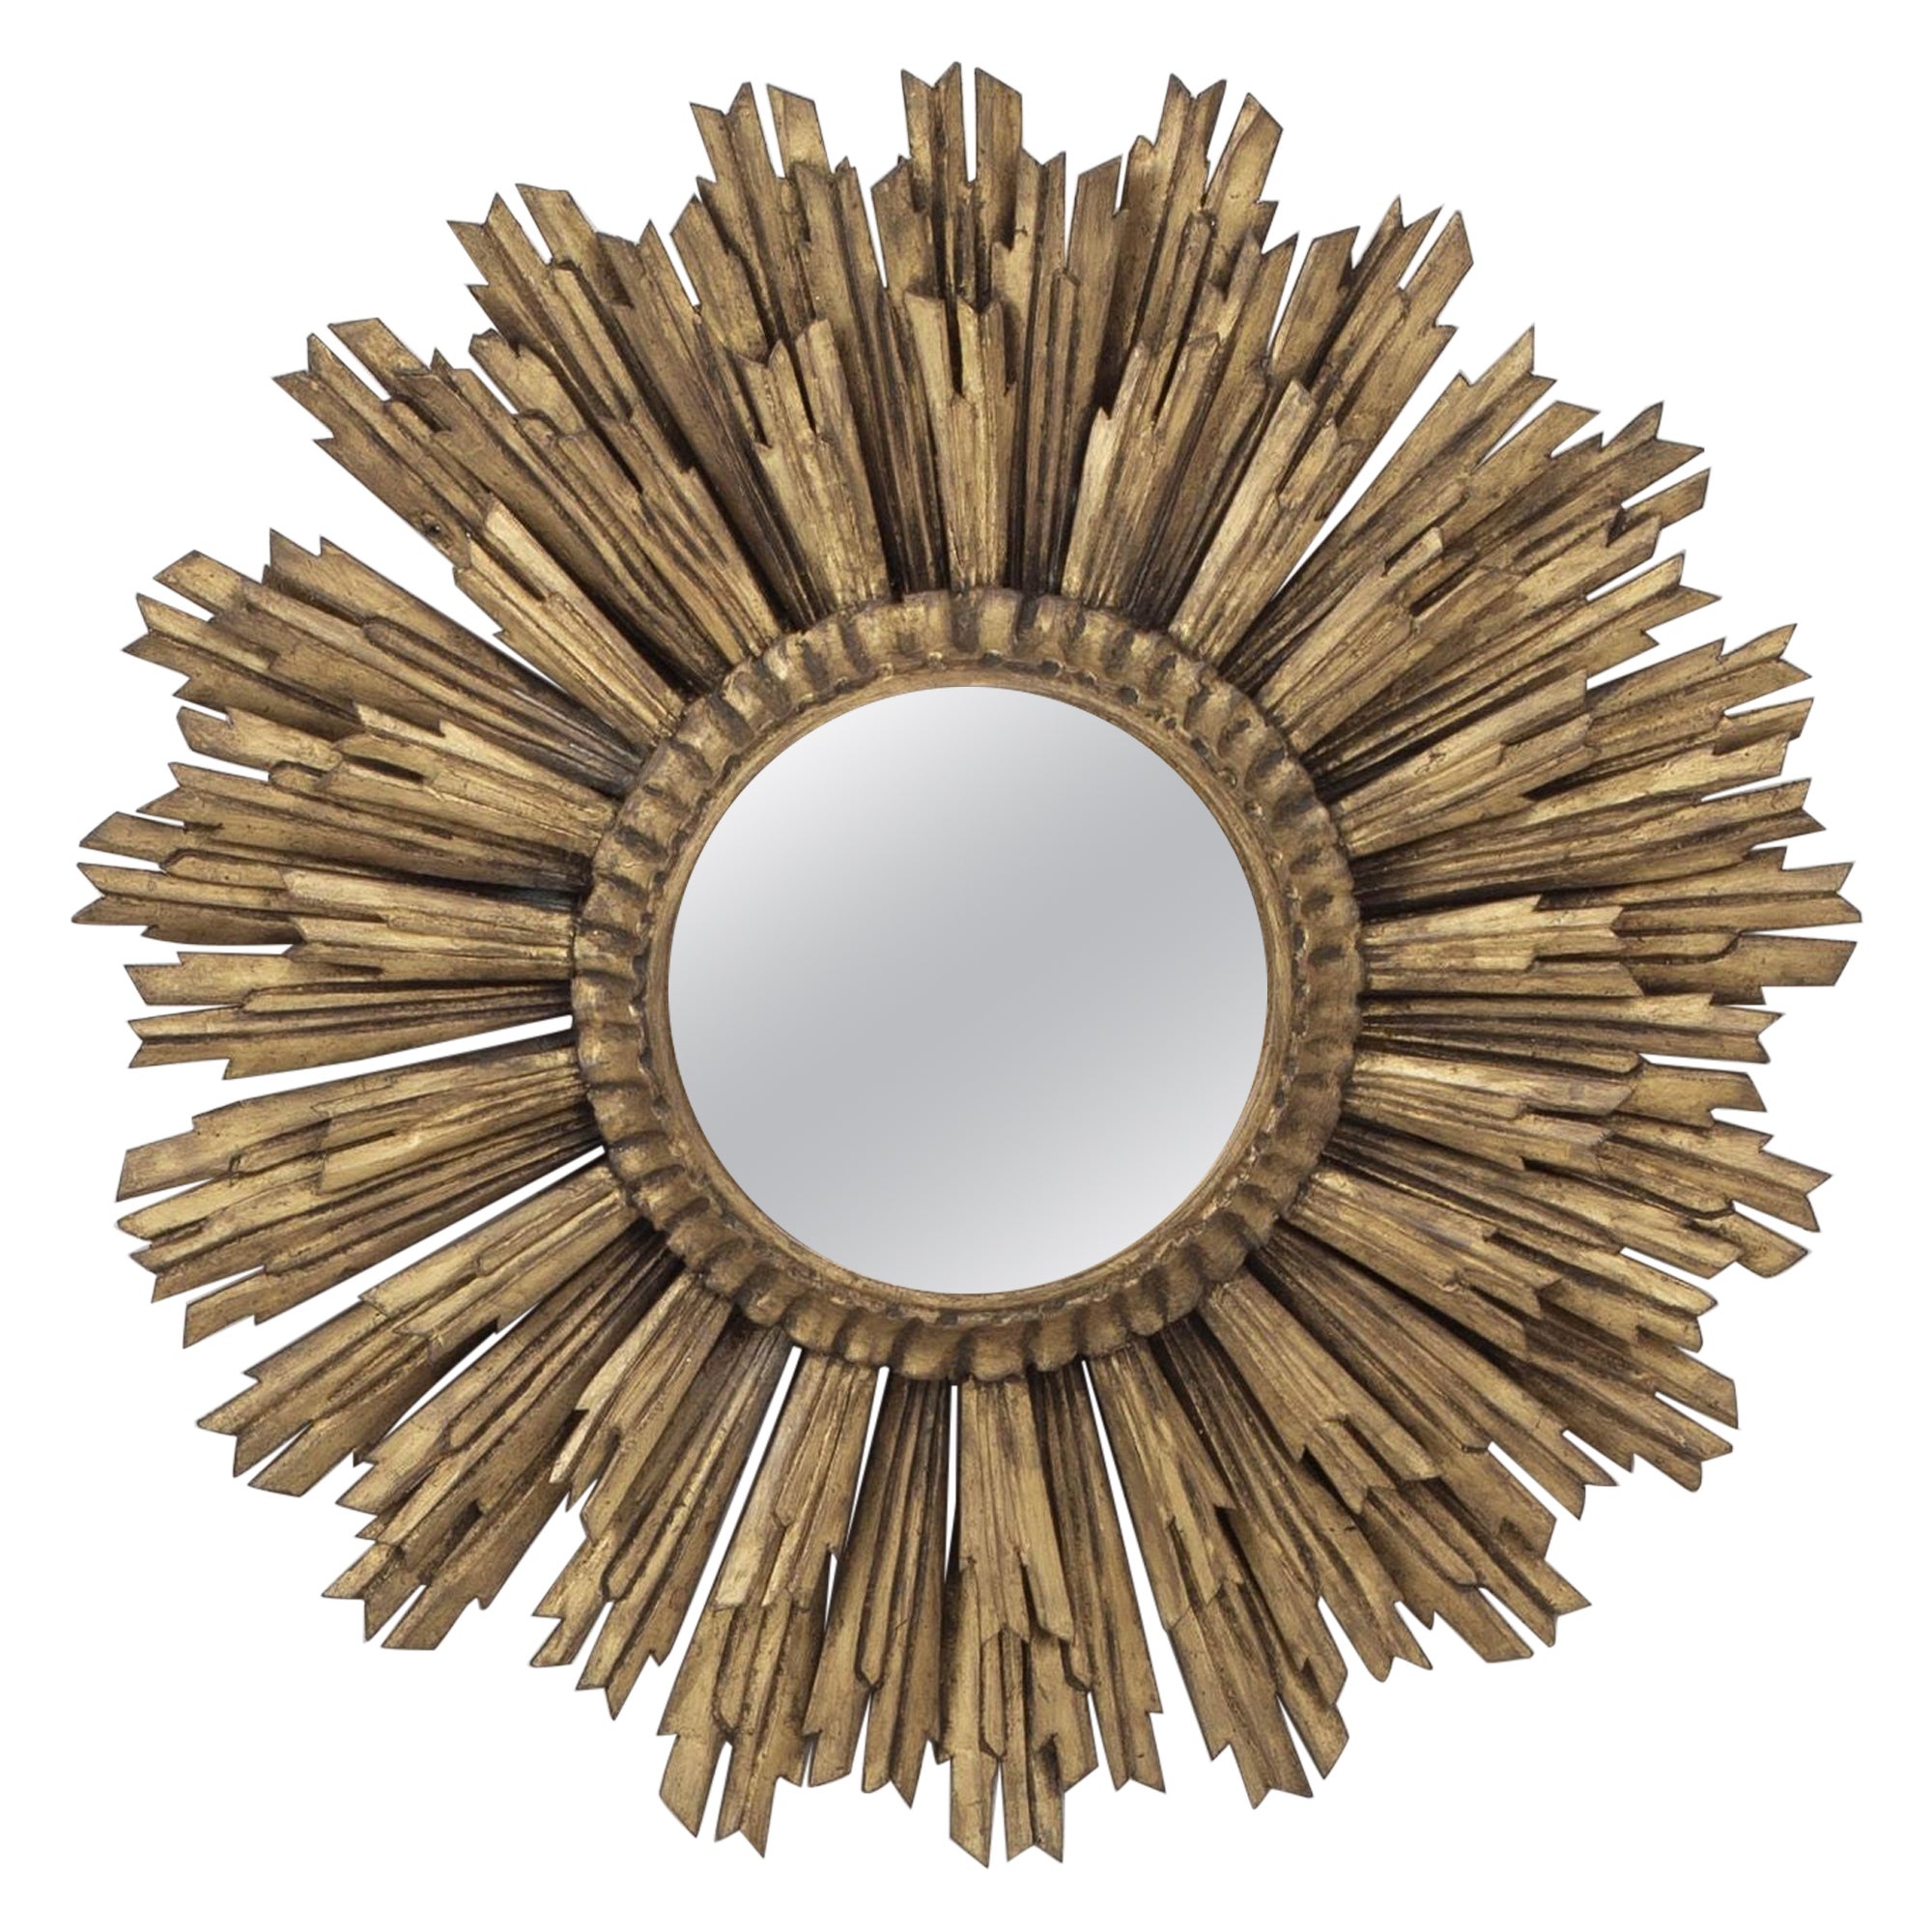 Large Early -Mid 20th c. French Art Deco Giltwood Sunburst Mirror